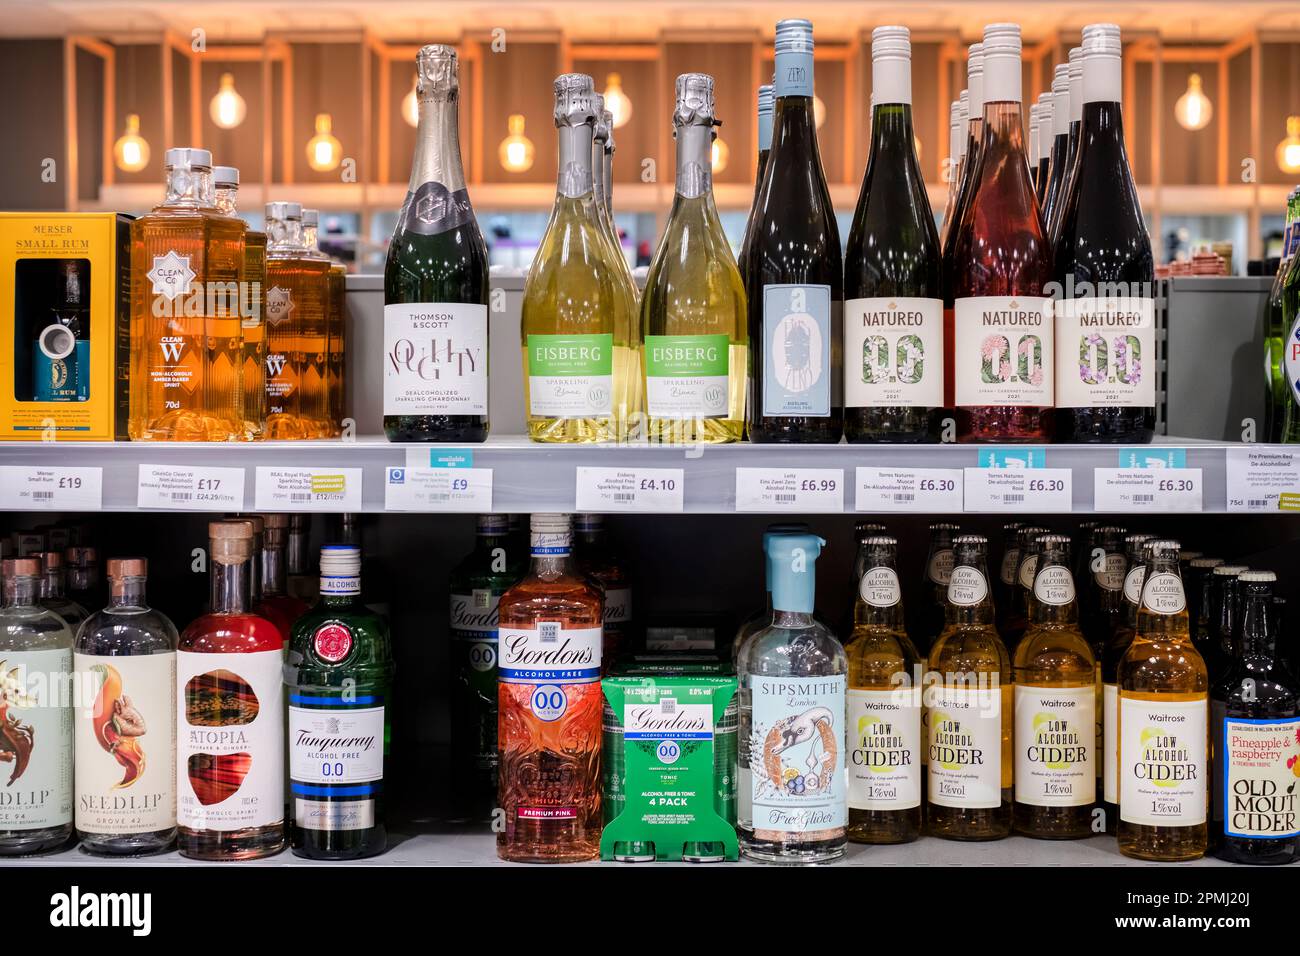 A uk supermarket shelf display of non alcoholic spirits and cider. The display includes bottles of non alcoholic gin by Gordons and Seedlip Stock Photo